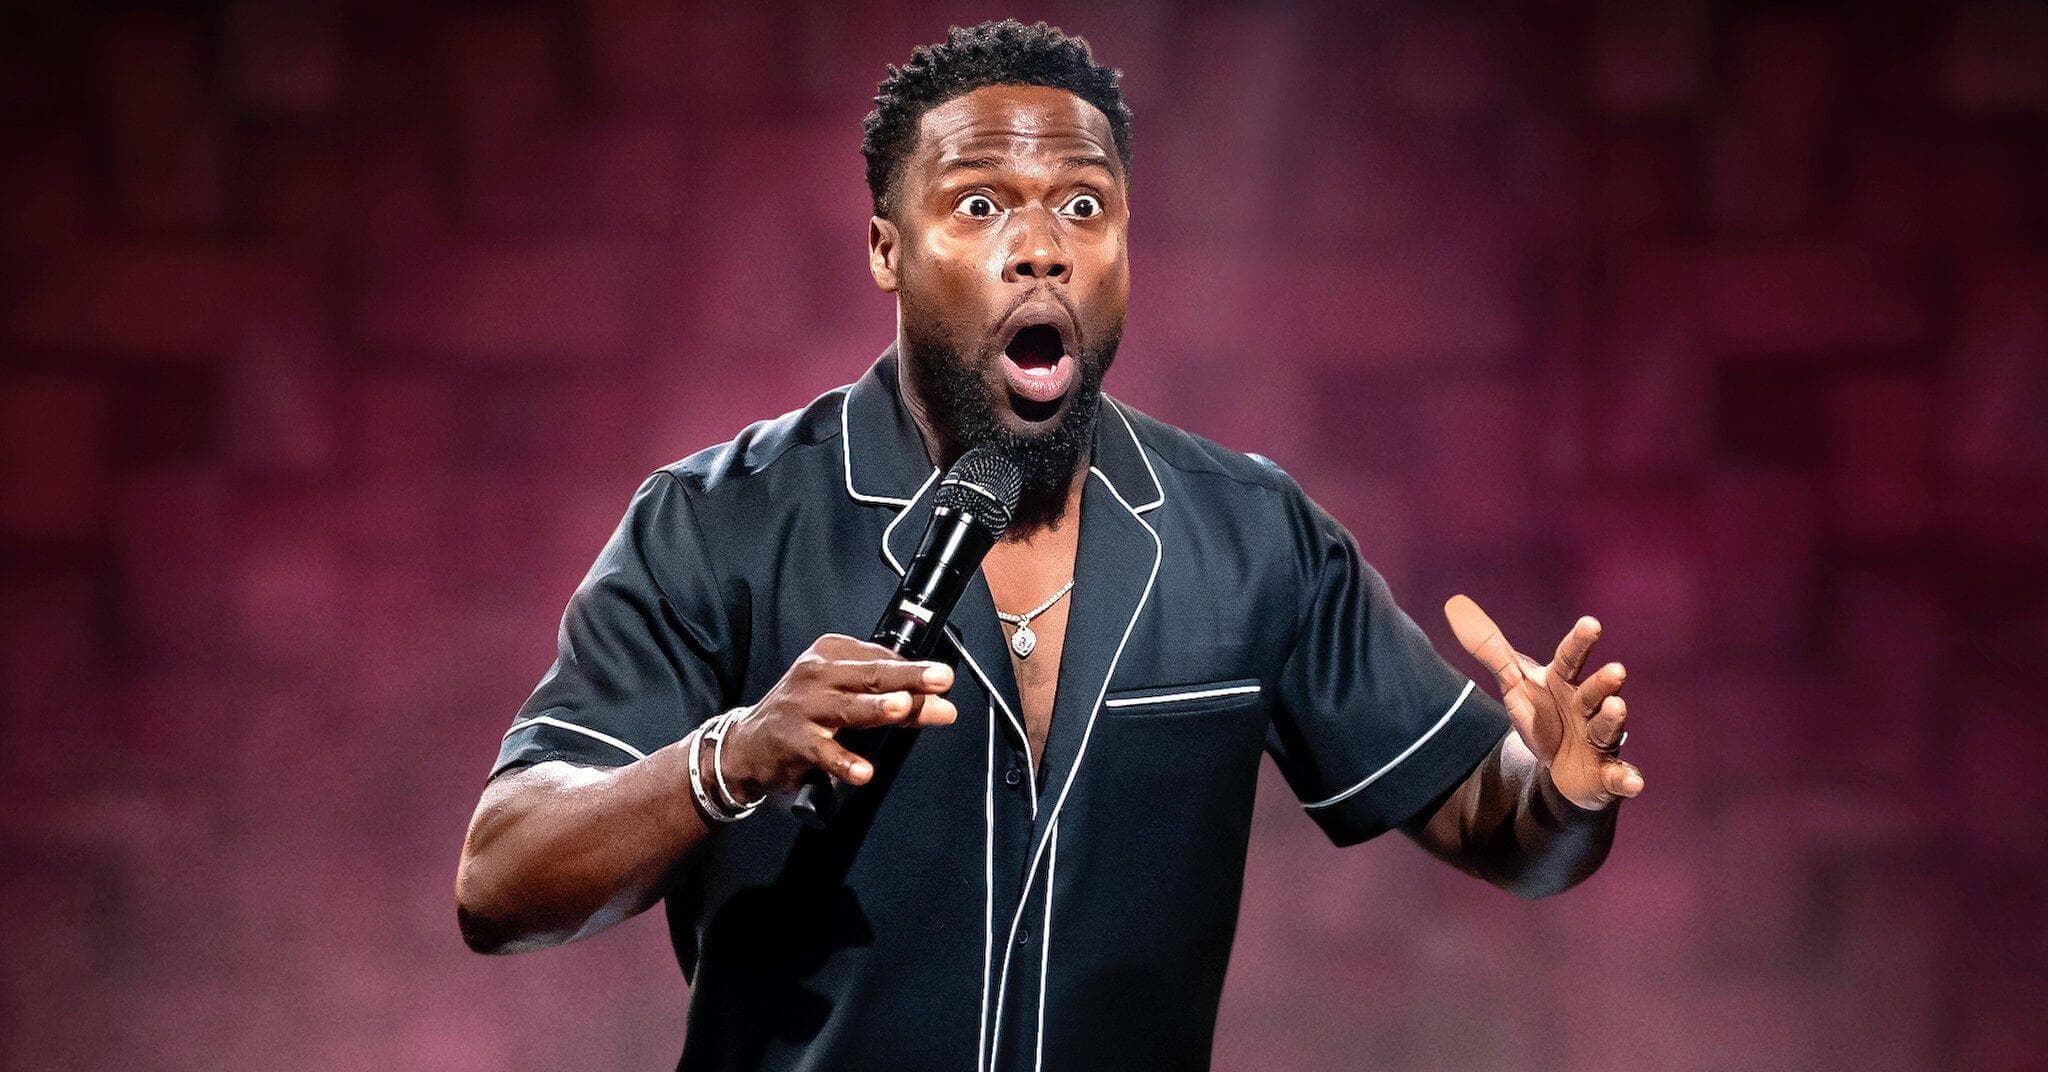 The Best Kevin Hart Comedy Specials On Netflix